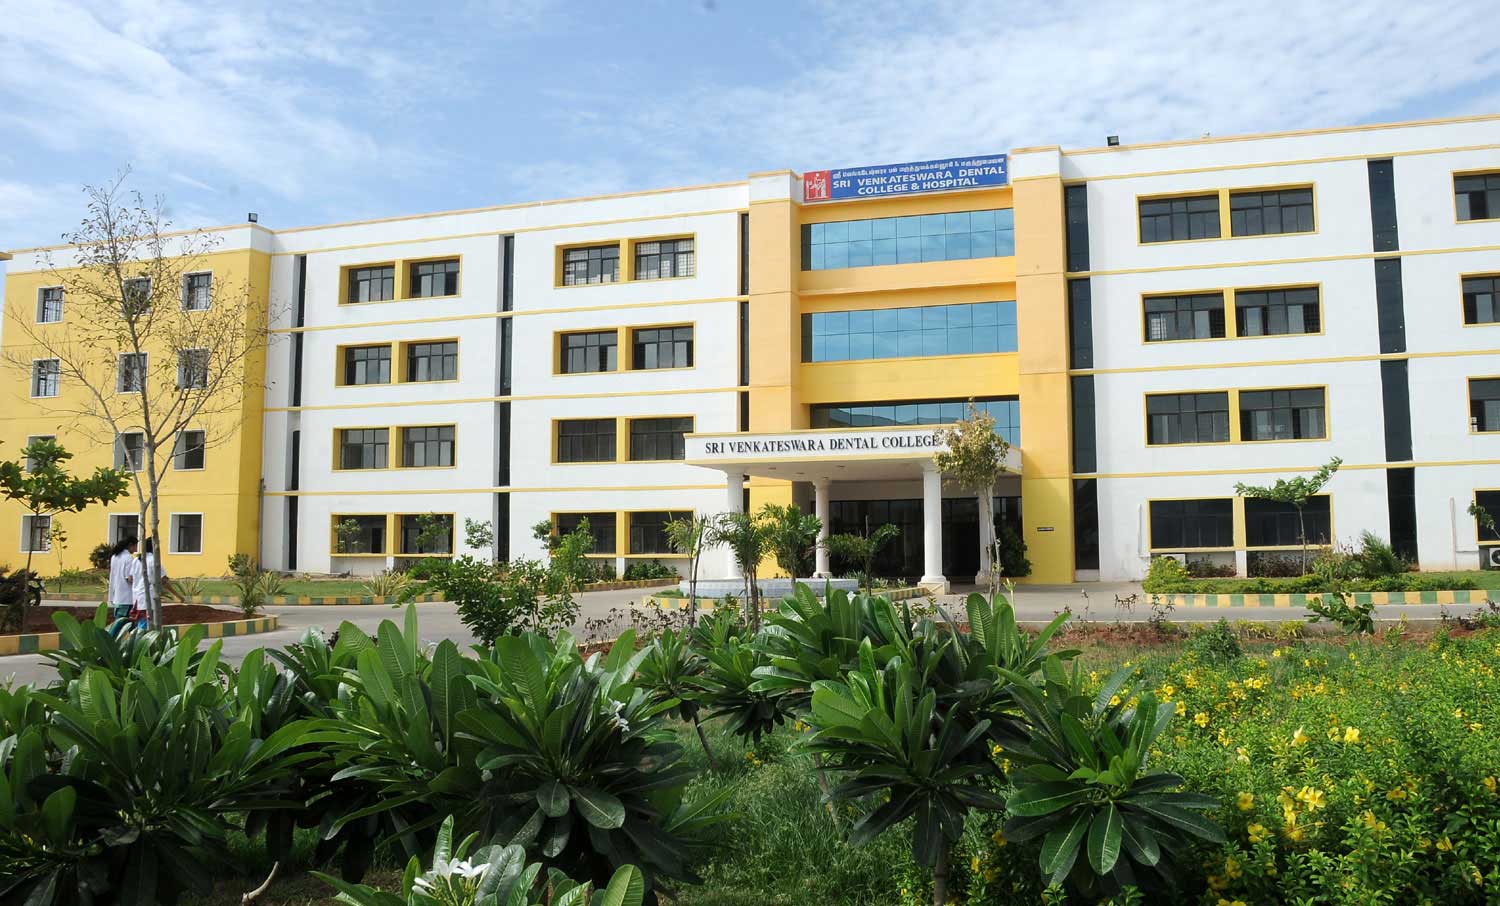 Sri Venkateswara Dental College Kanchipuram Admission, Courses Offered, Fees structure, Placements, Facilities